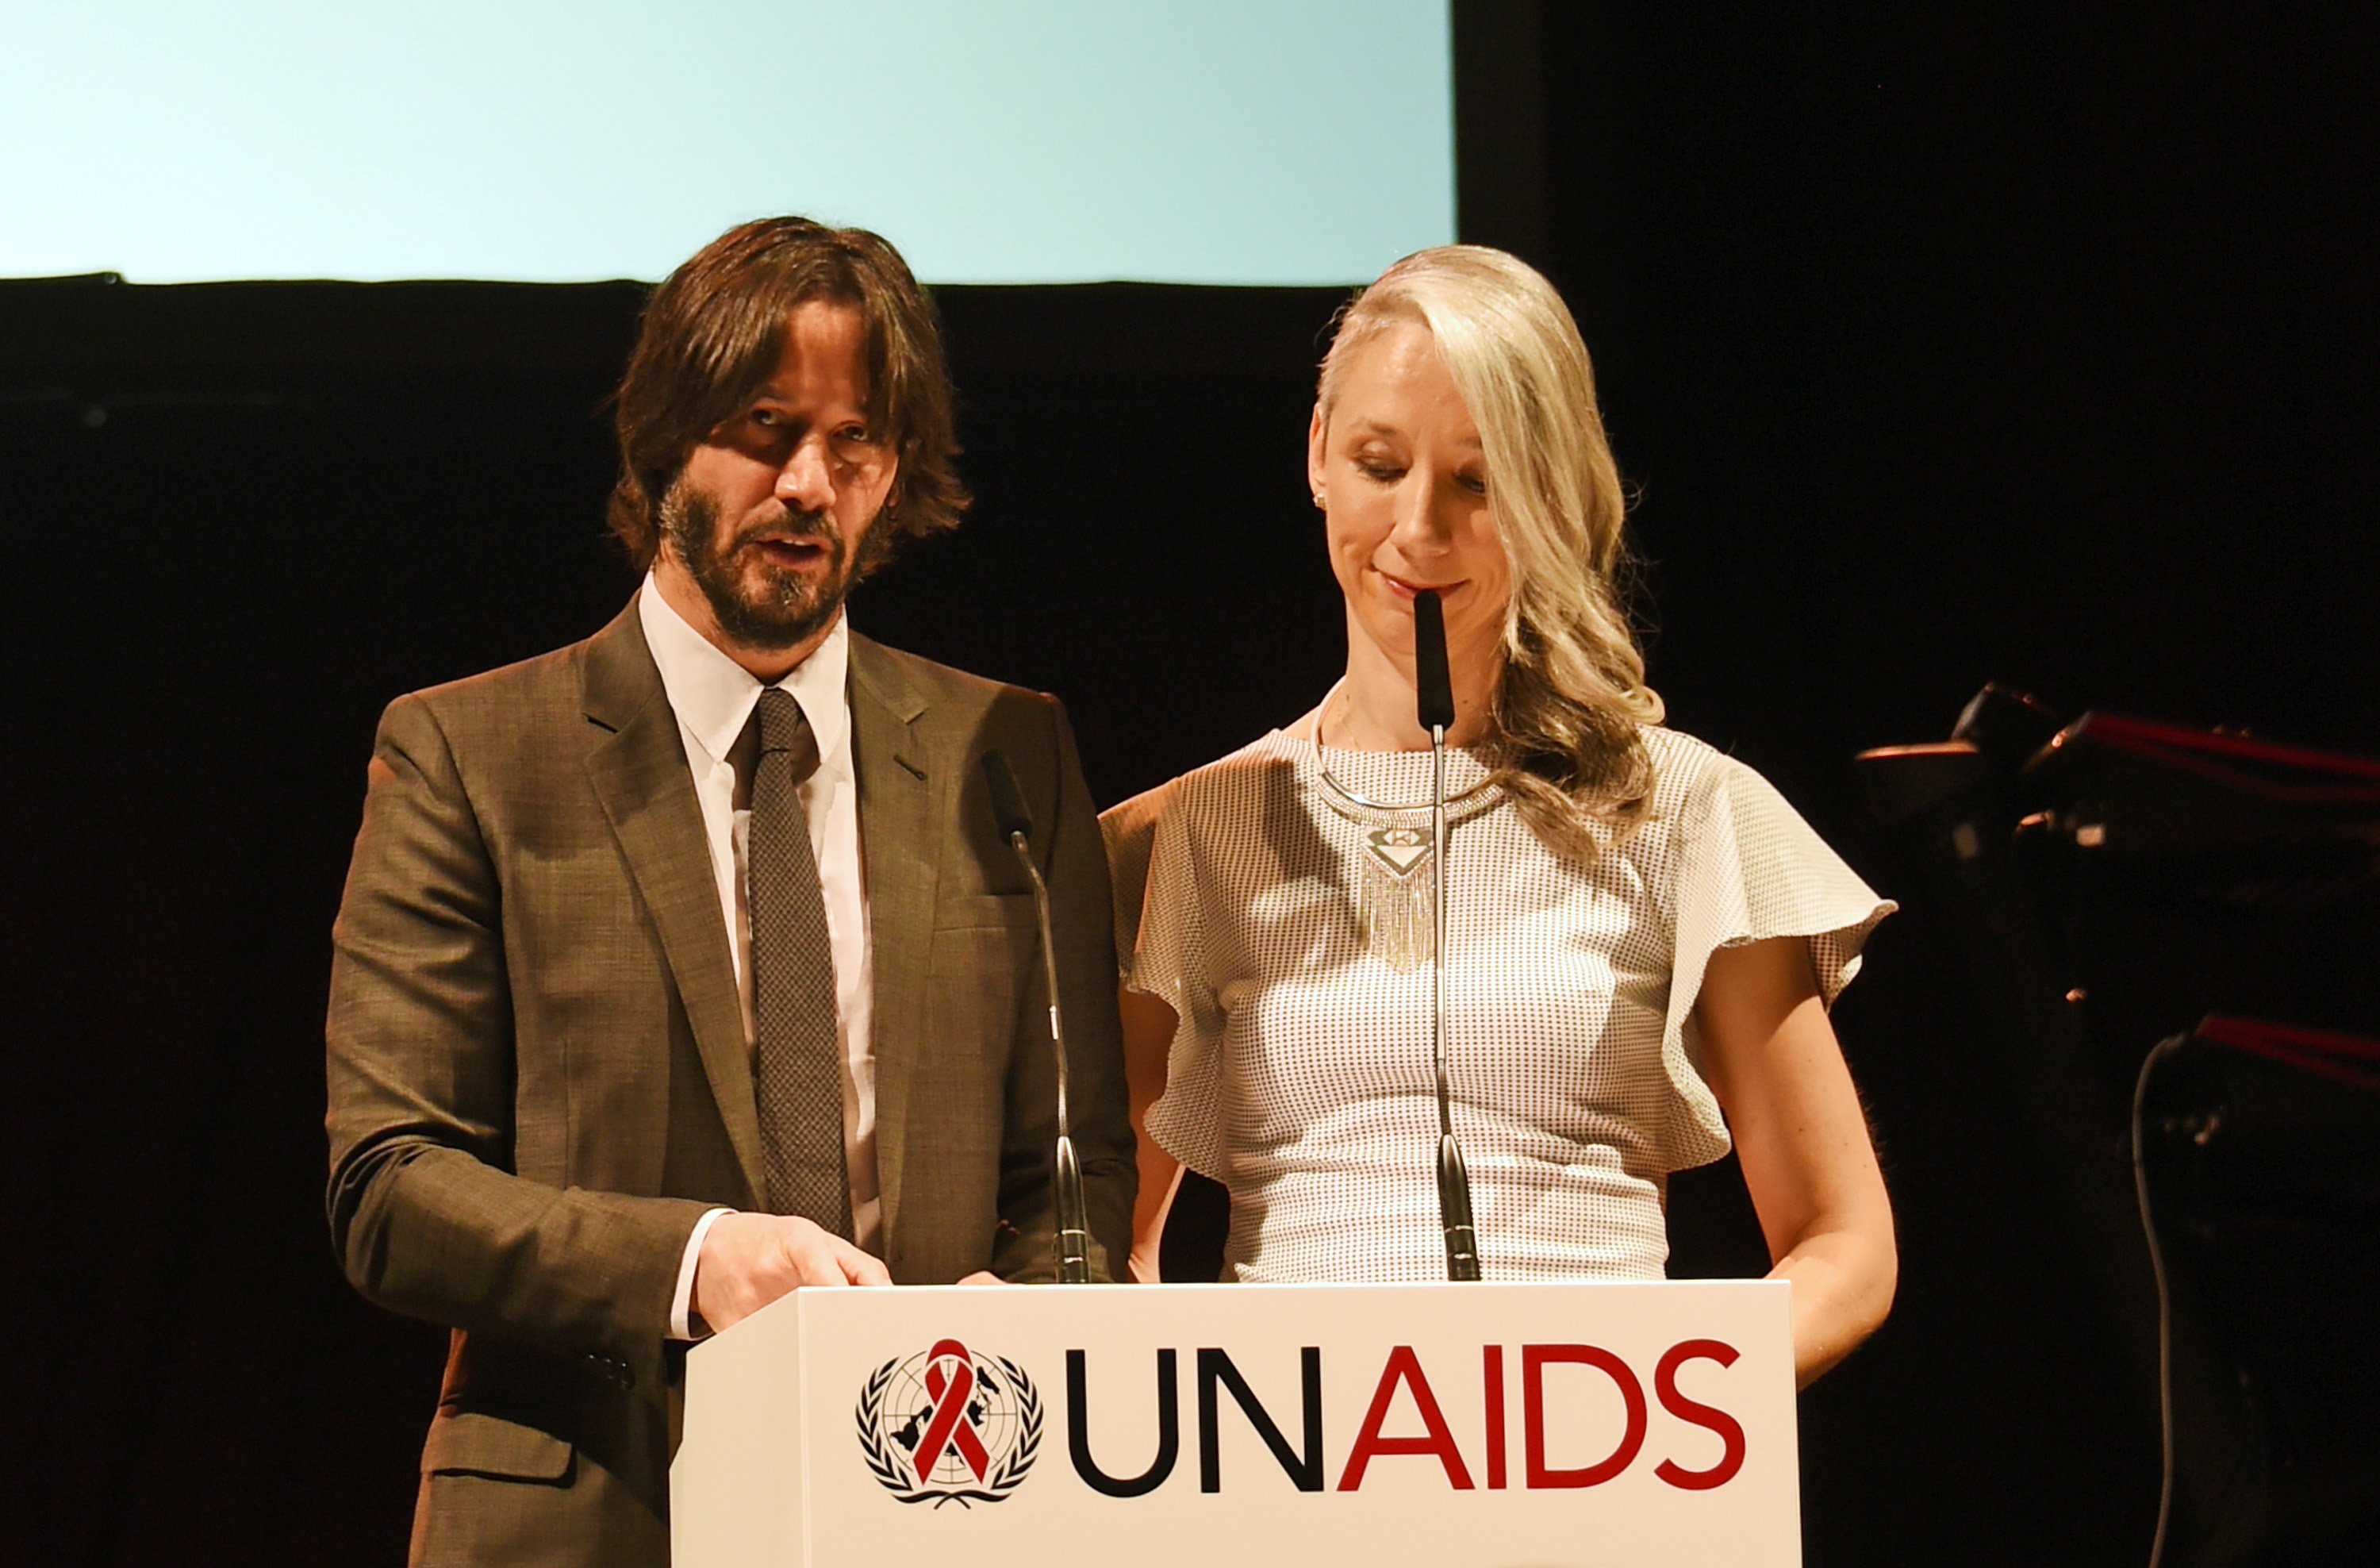 Keanu Reeves and Alexandra Grant speak at the UNAIDS Gala during Art Basel 2016 at Design Miami/ Basel on June 13, 2016 in Basel, Switzerland. | Image: Getty Images